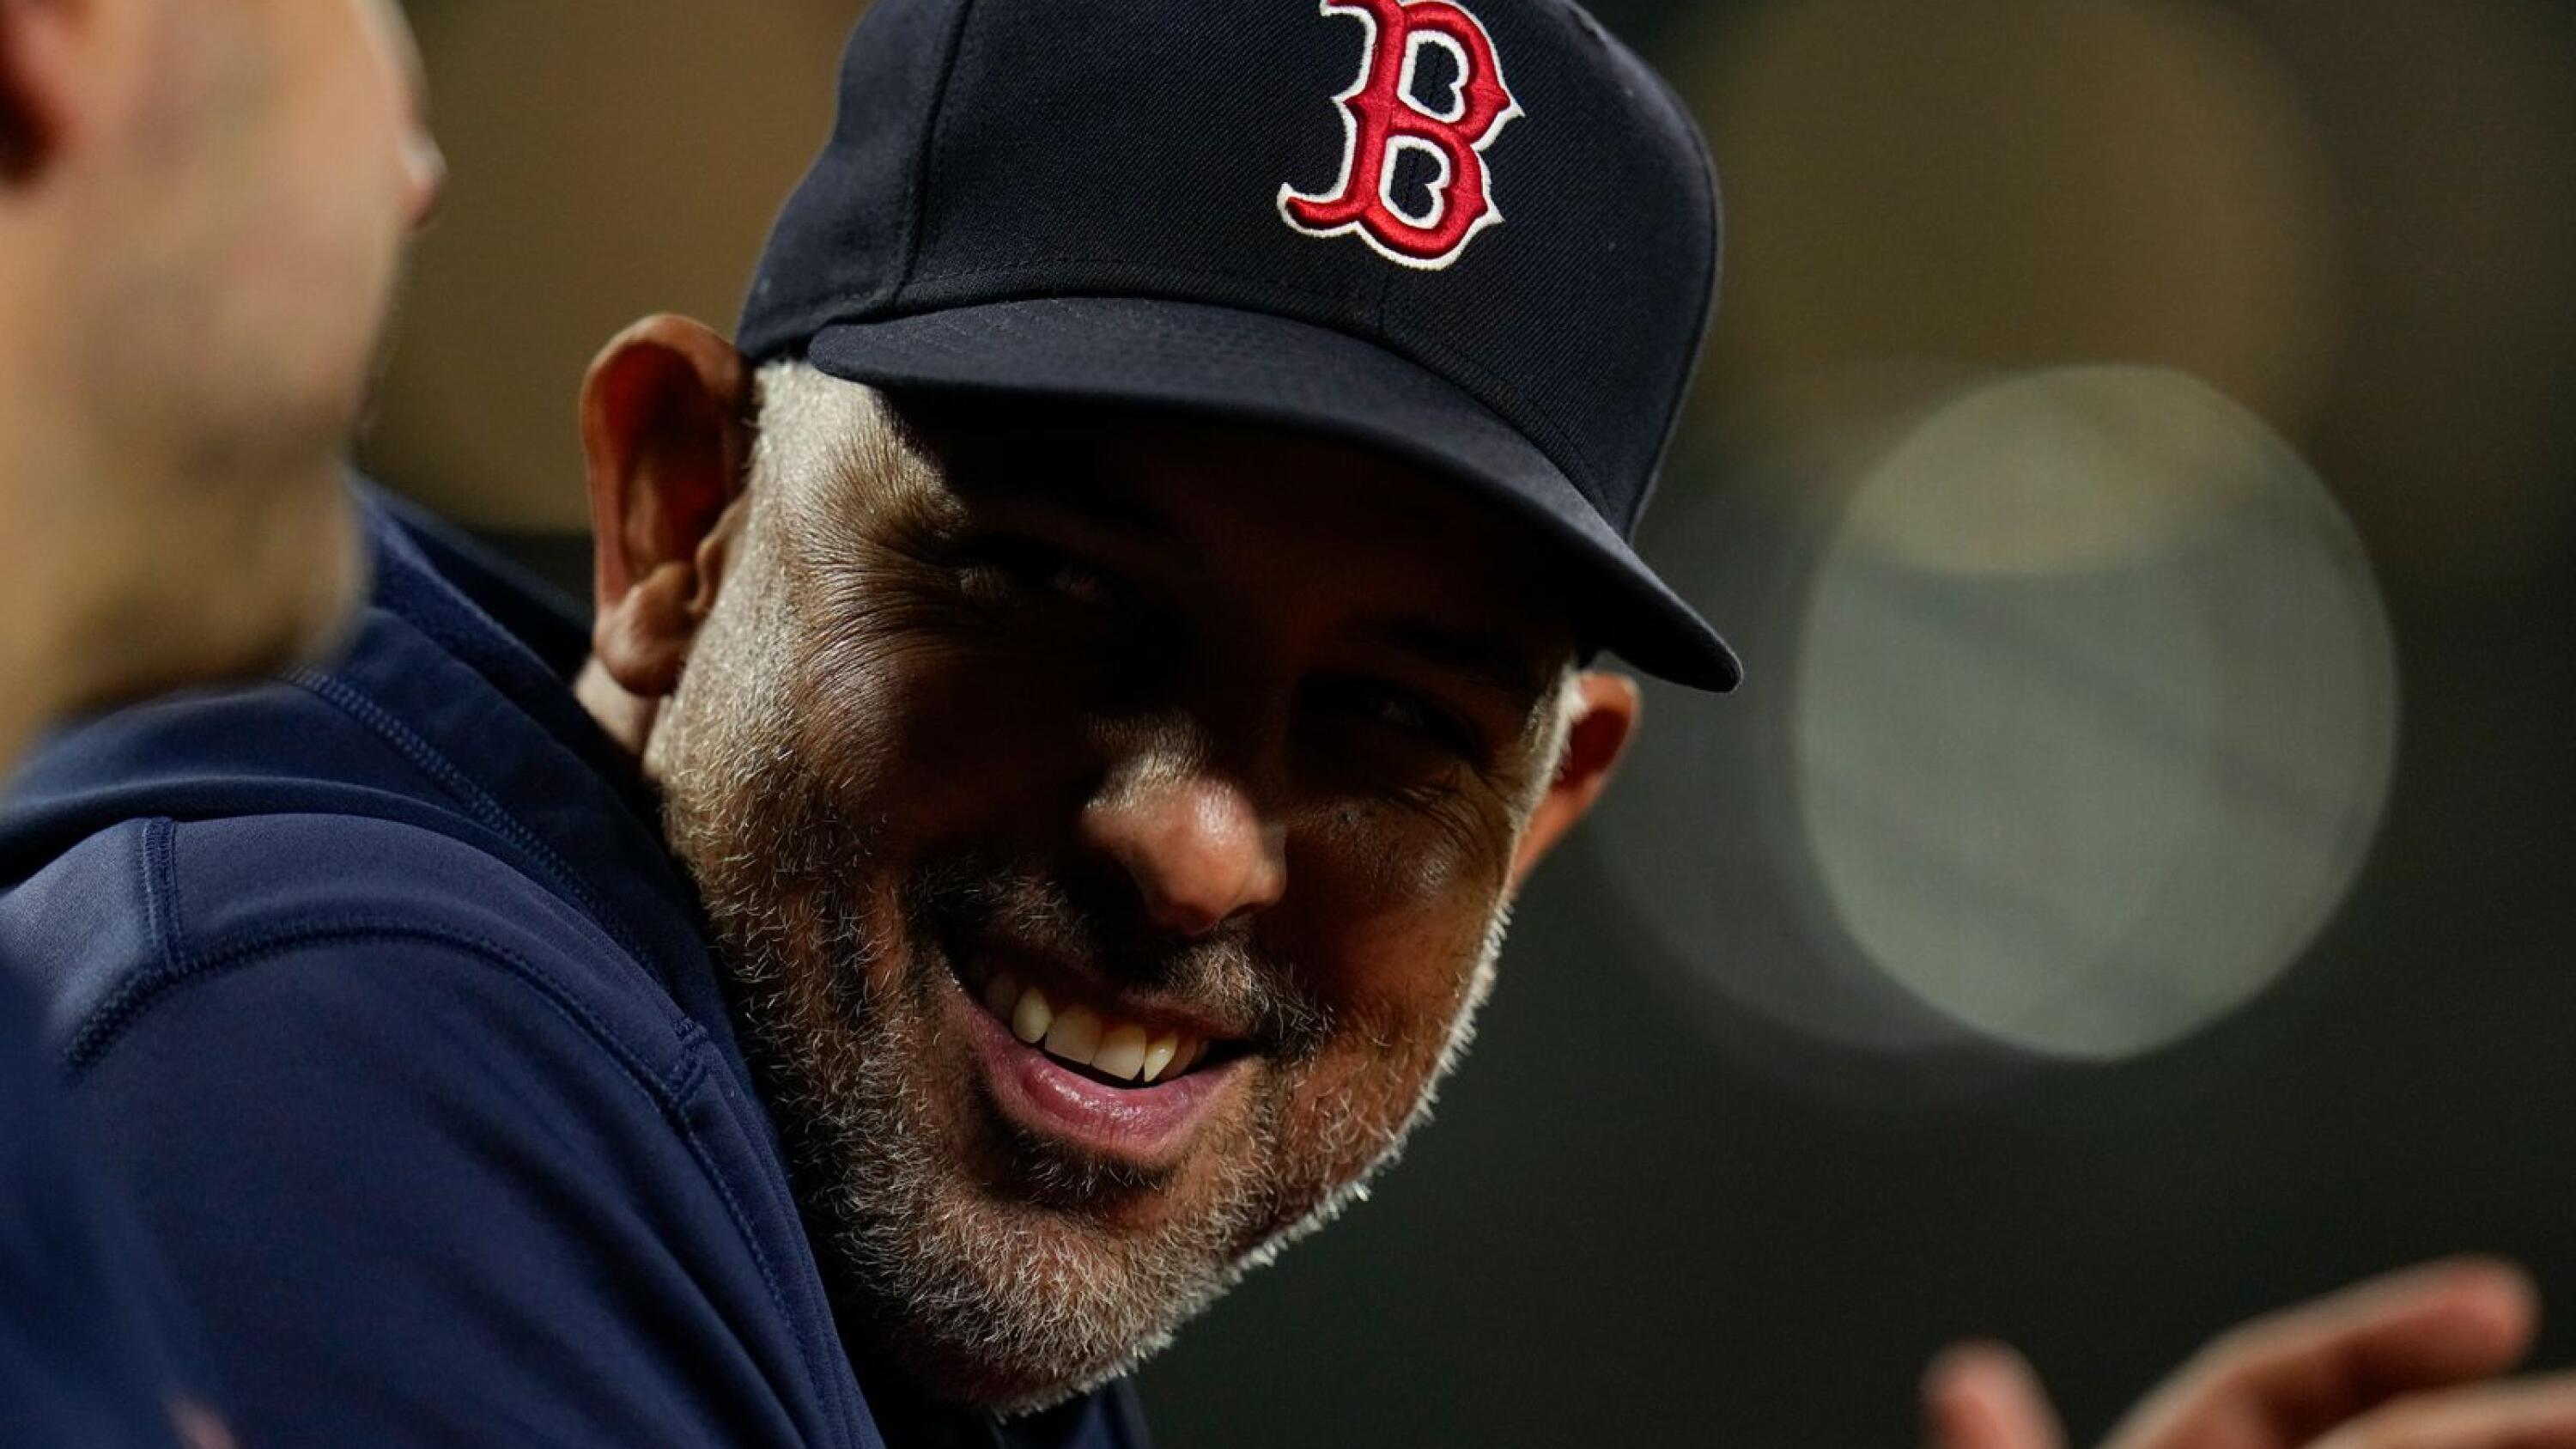 Red Sox top list of five most disappointing offseasons so far